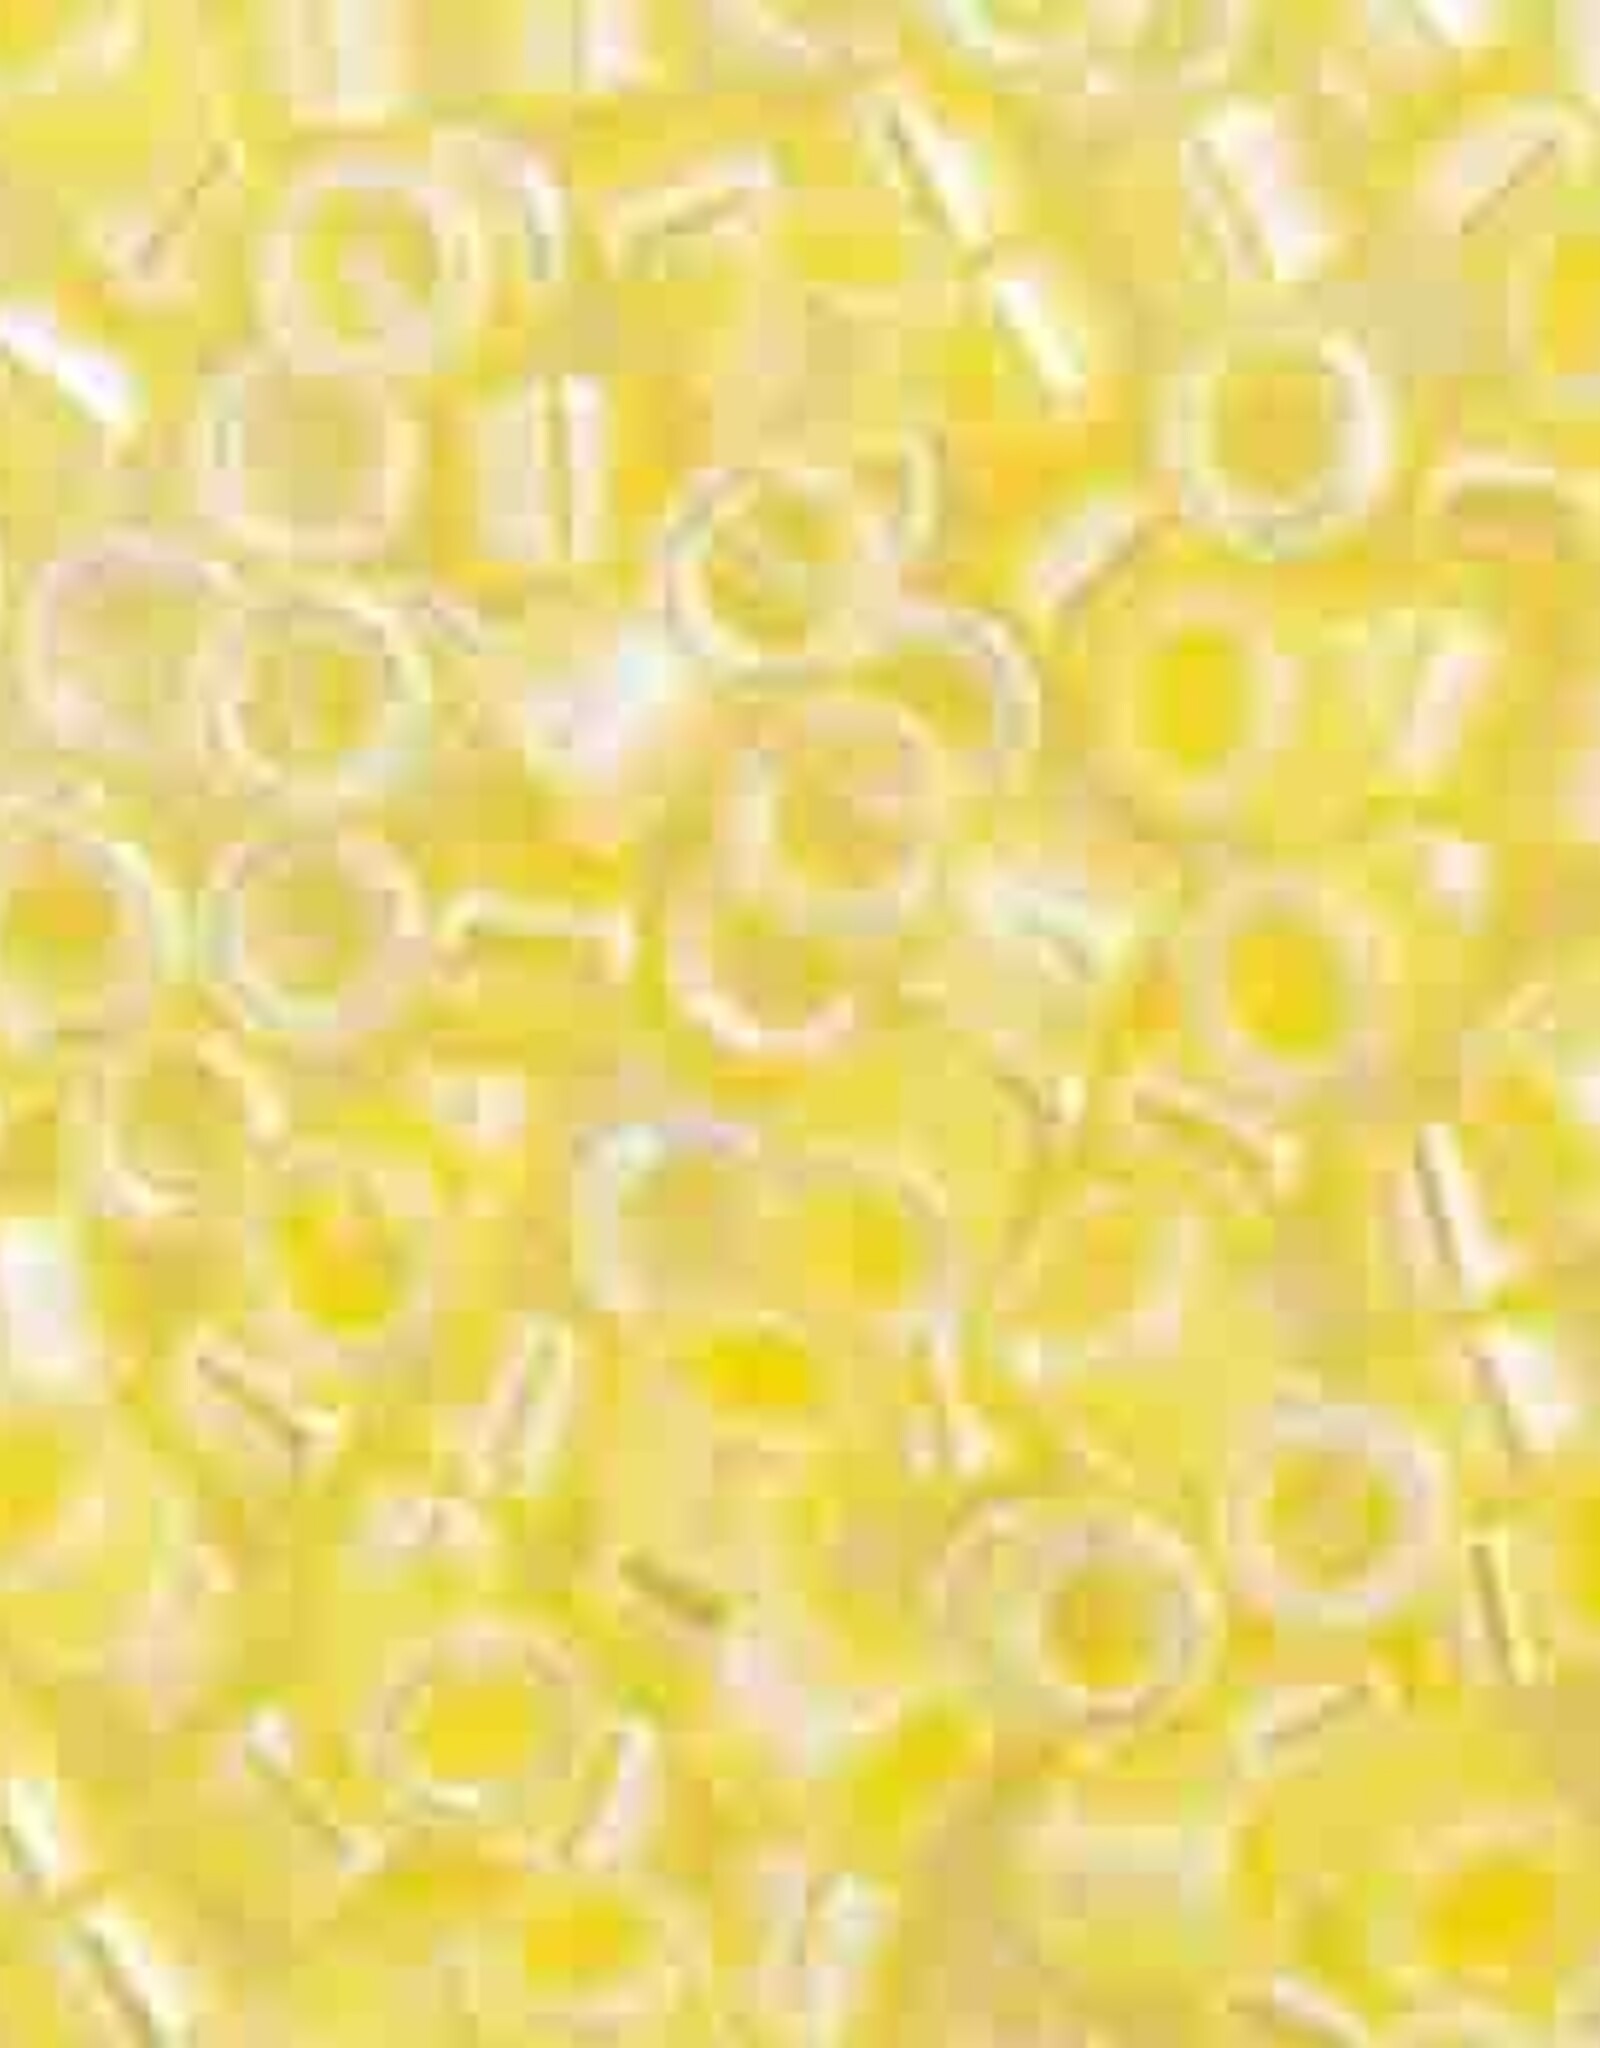 Miyuki Delica Seed Beads Delica 11/0 RD Program Pale Yellow Lined-Dyed